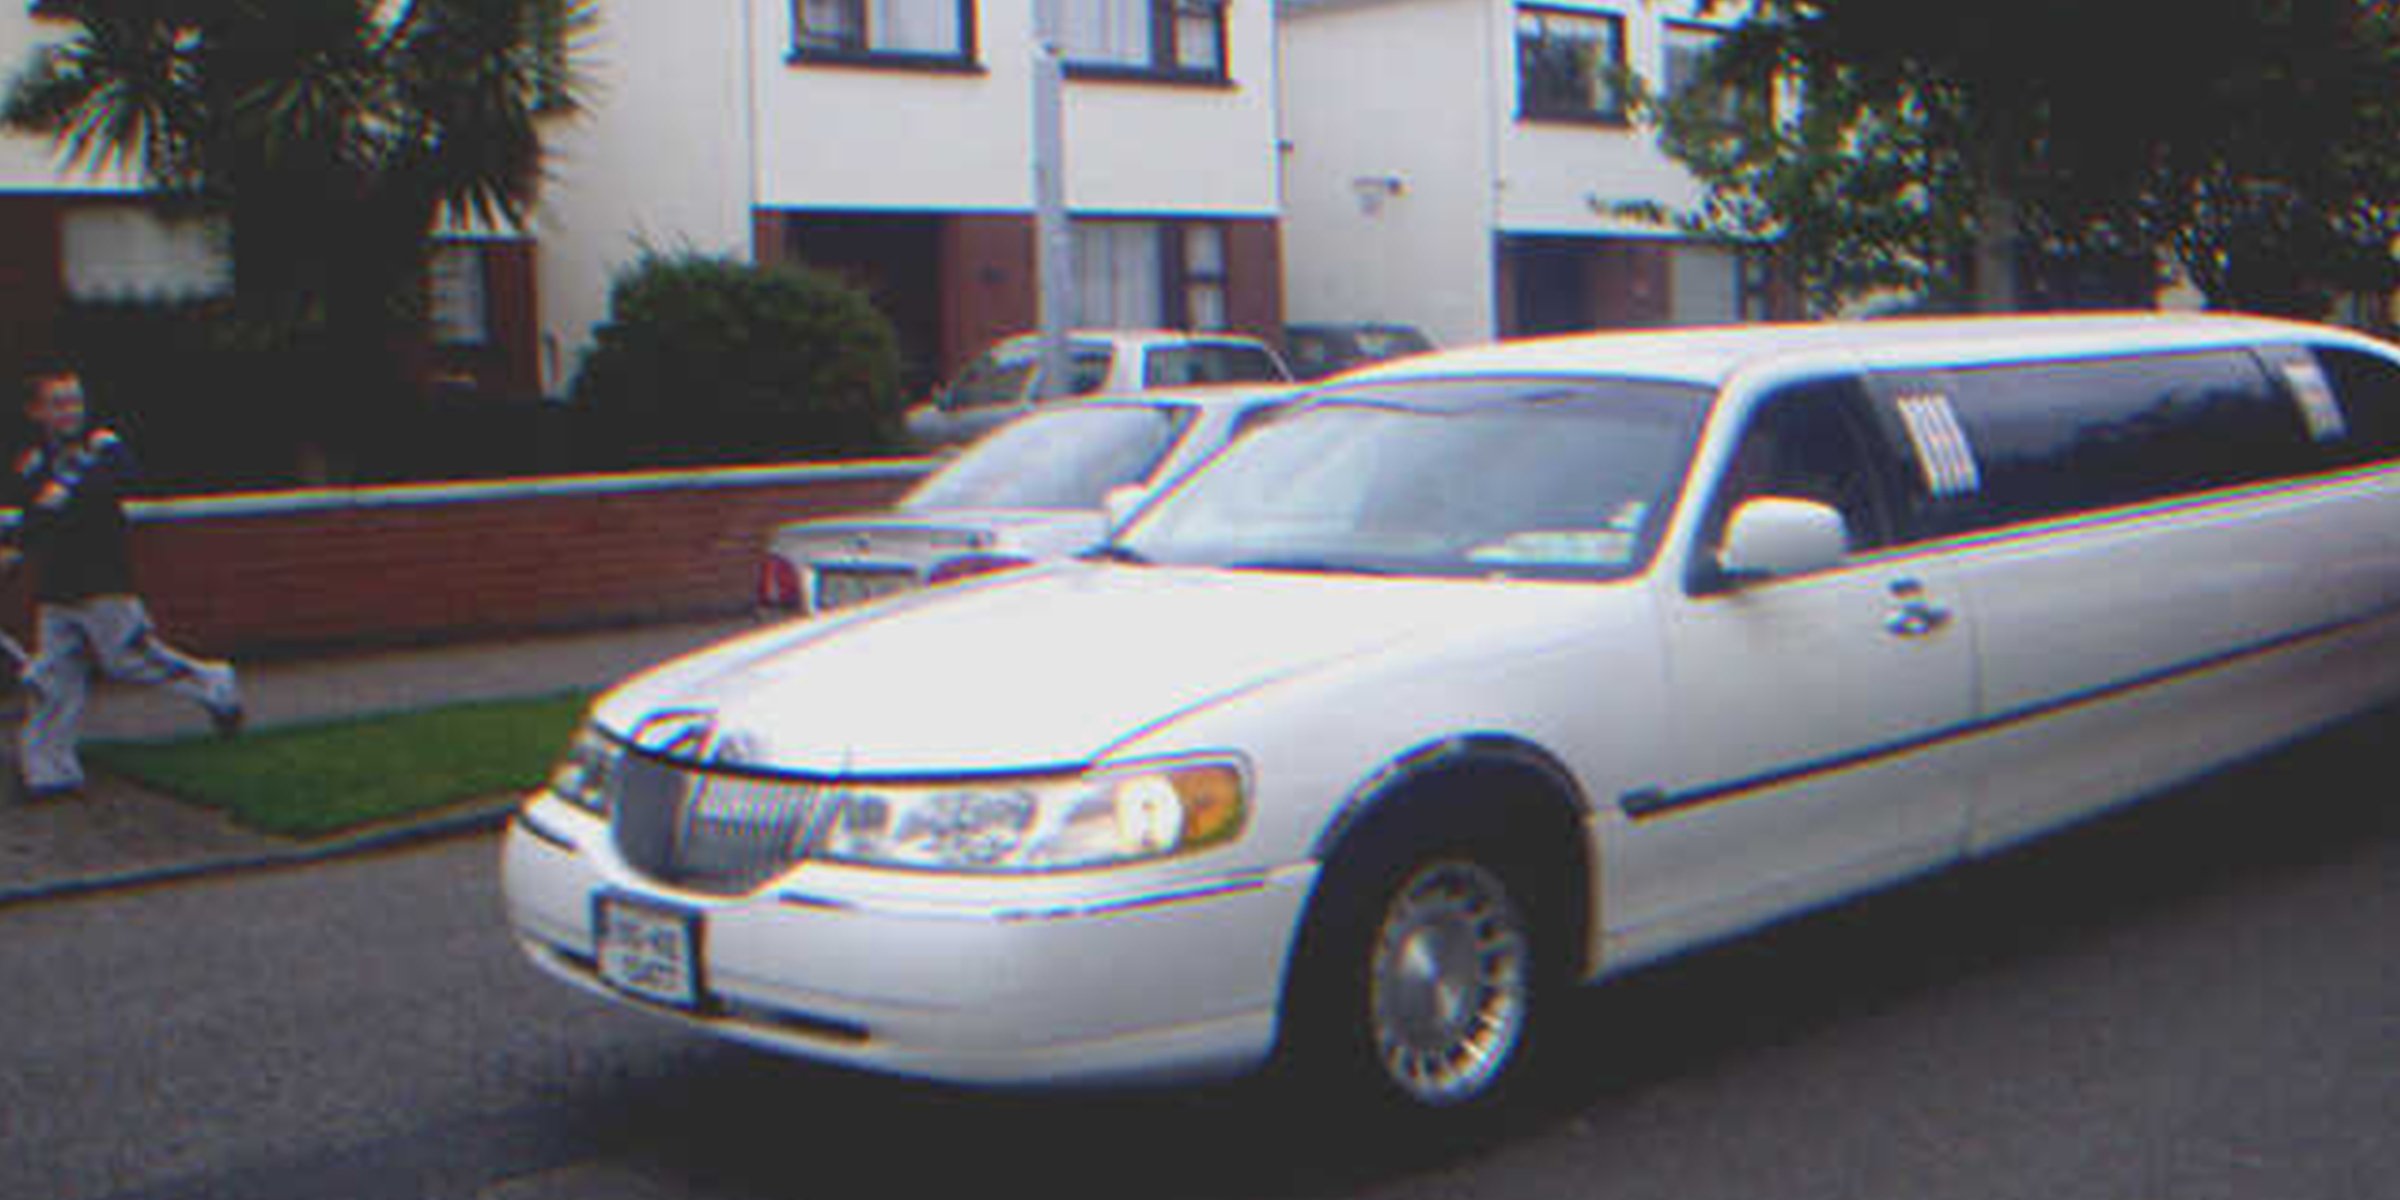 A white limo on the street | Source: Flickr/Brian O'Donovan (CC BY 2.0)